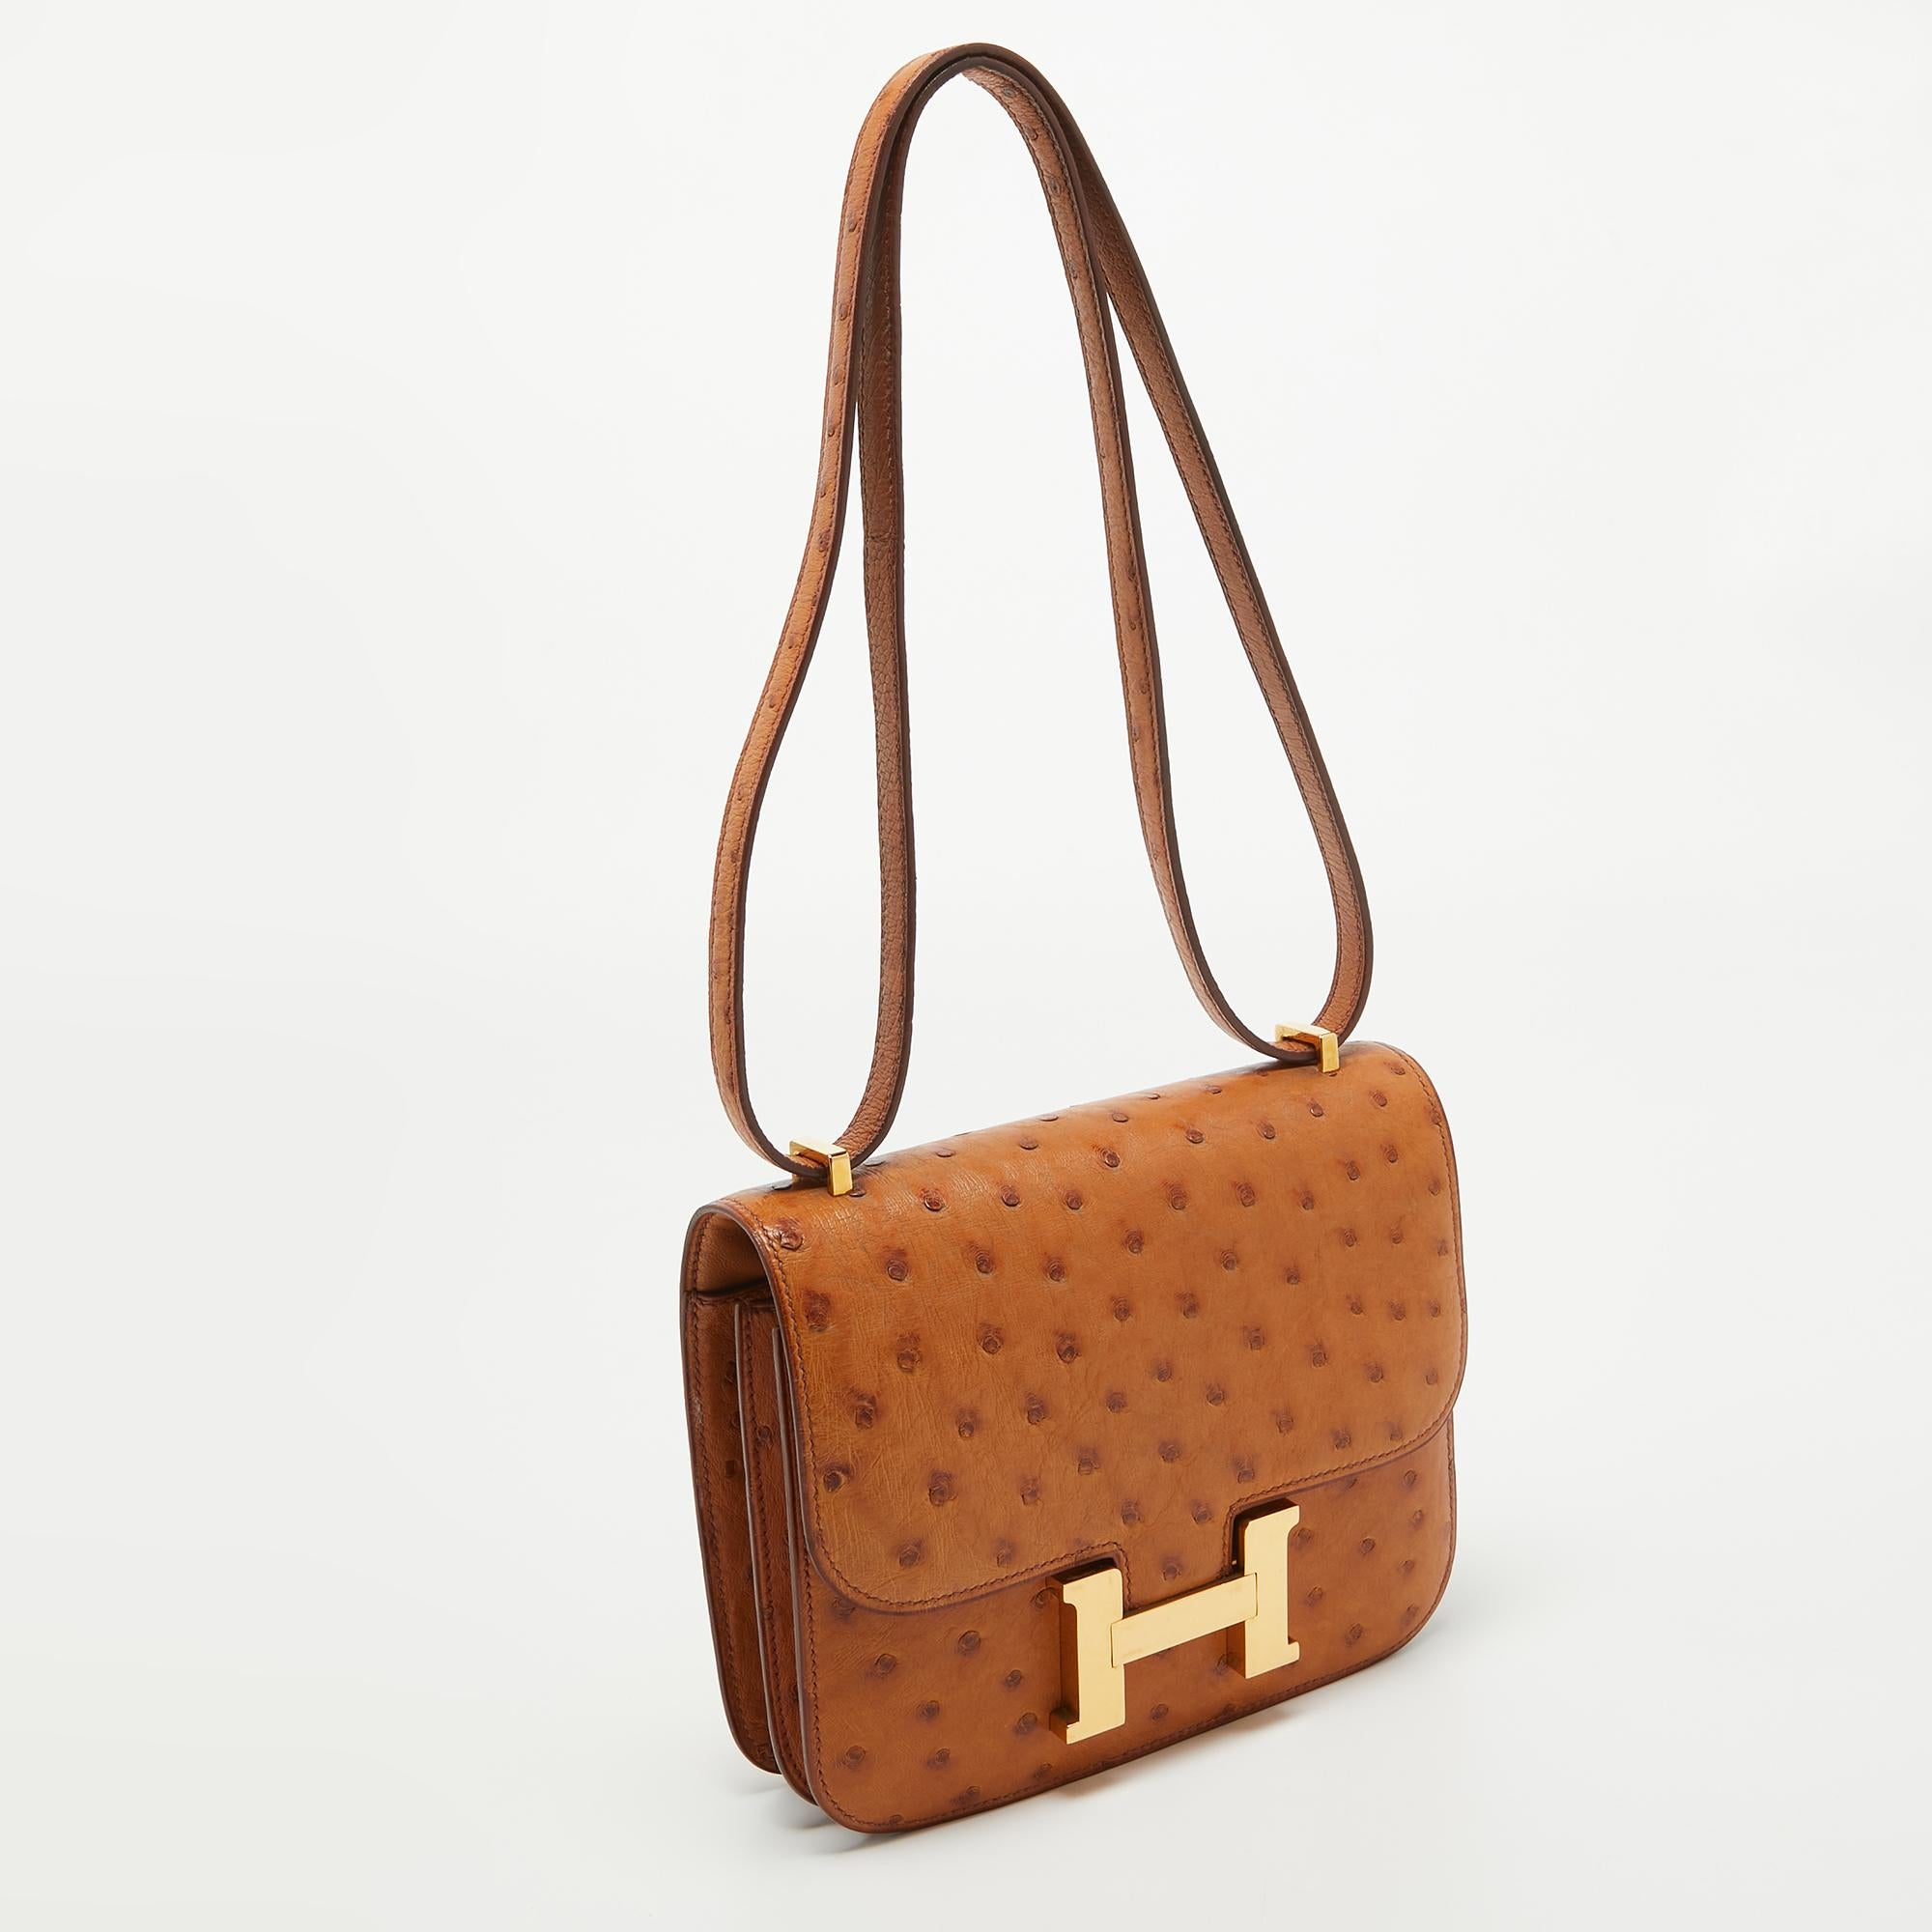 This Hermes Naturale Ostrich Constance III Mini is crafted using ostrich leather and features the iconic H clasp on the front flap. The shoulder strap lets you carry it gracefully, and the fine finish of the sturdy silhouette projects a luxe look.